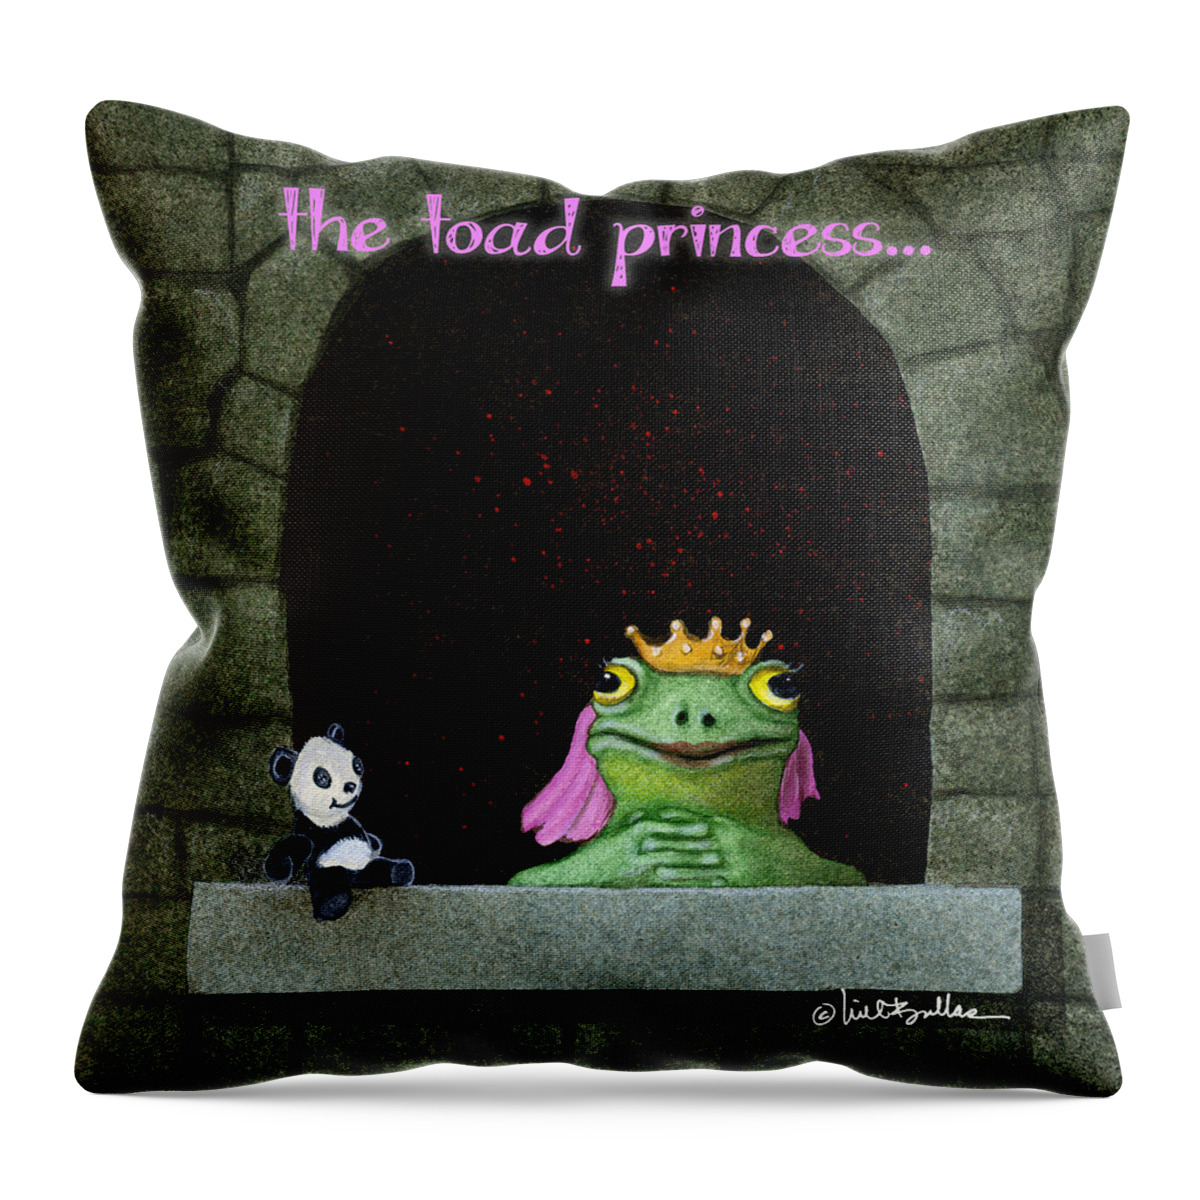 Will Bullas Throw Pillow featuring the painting Toad Princess... by Will Bullas